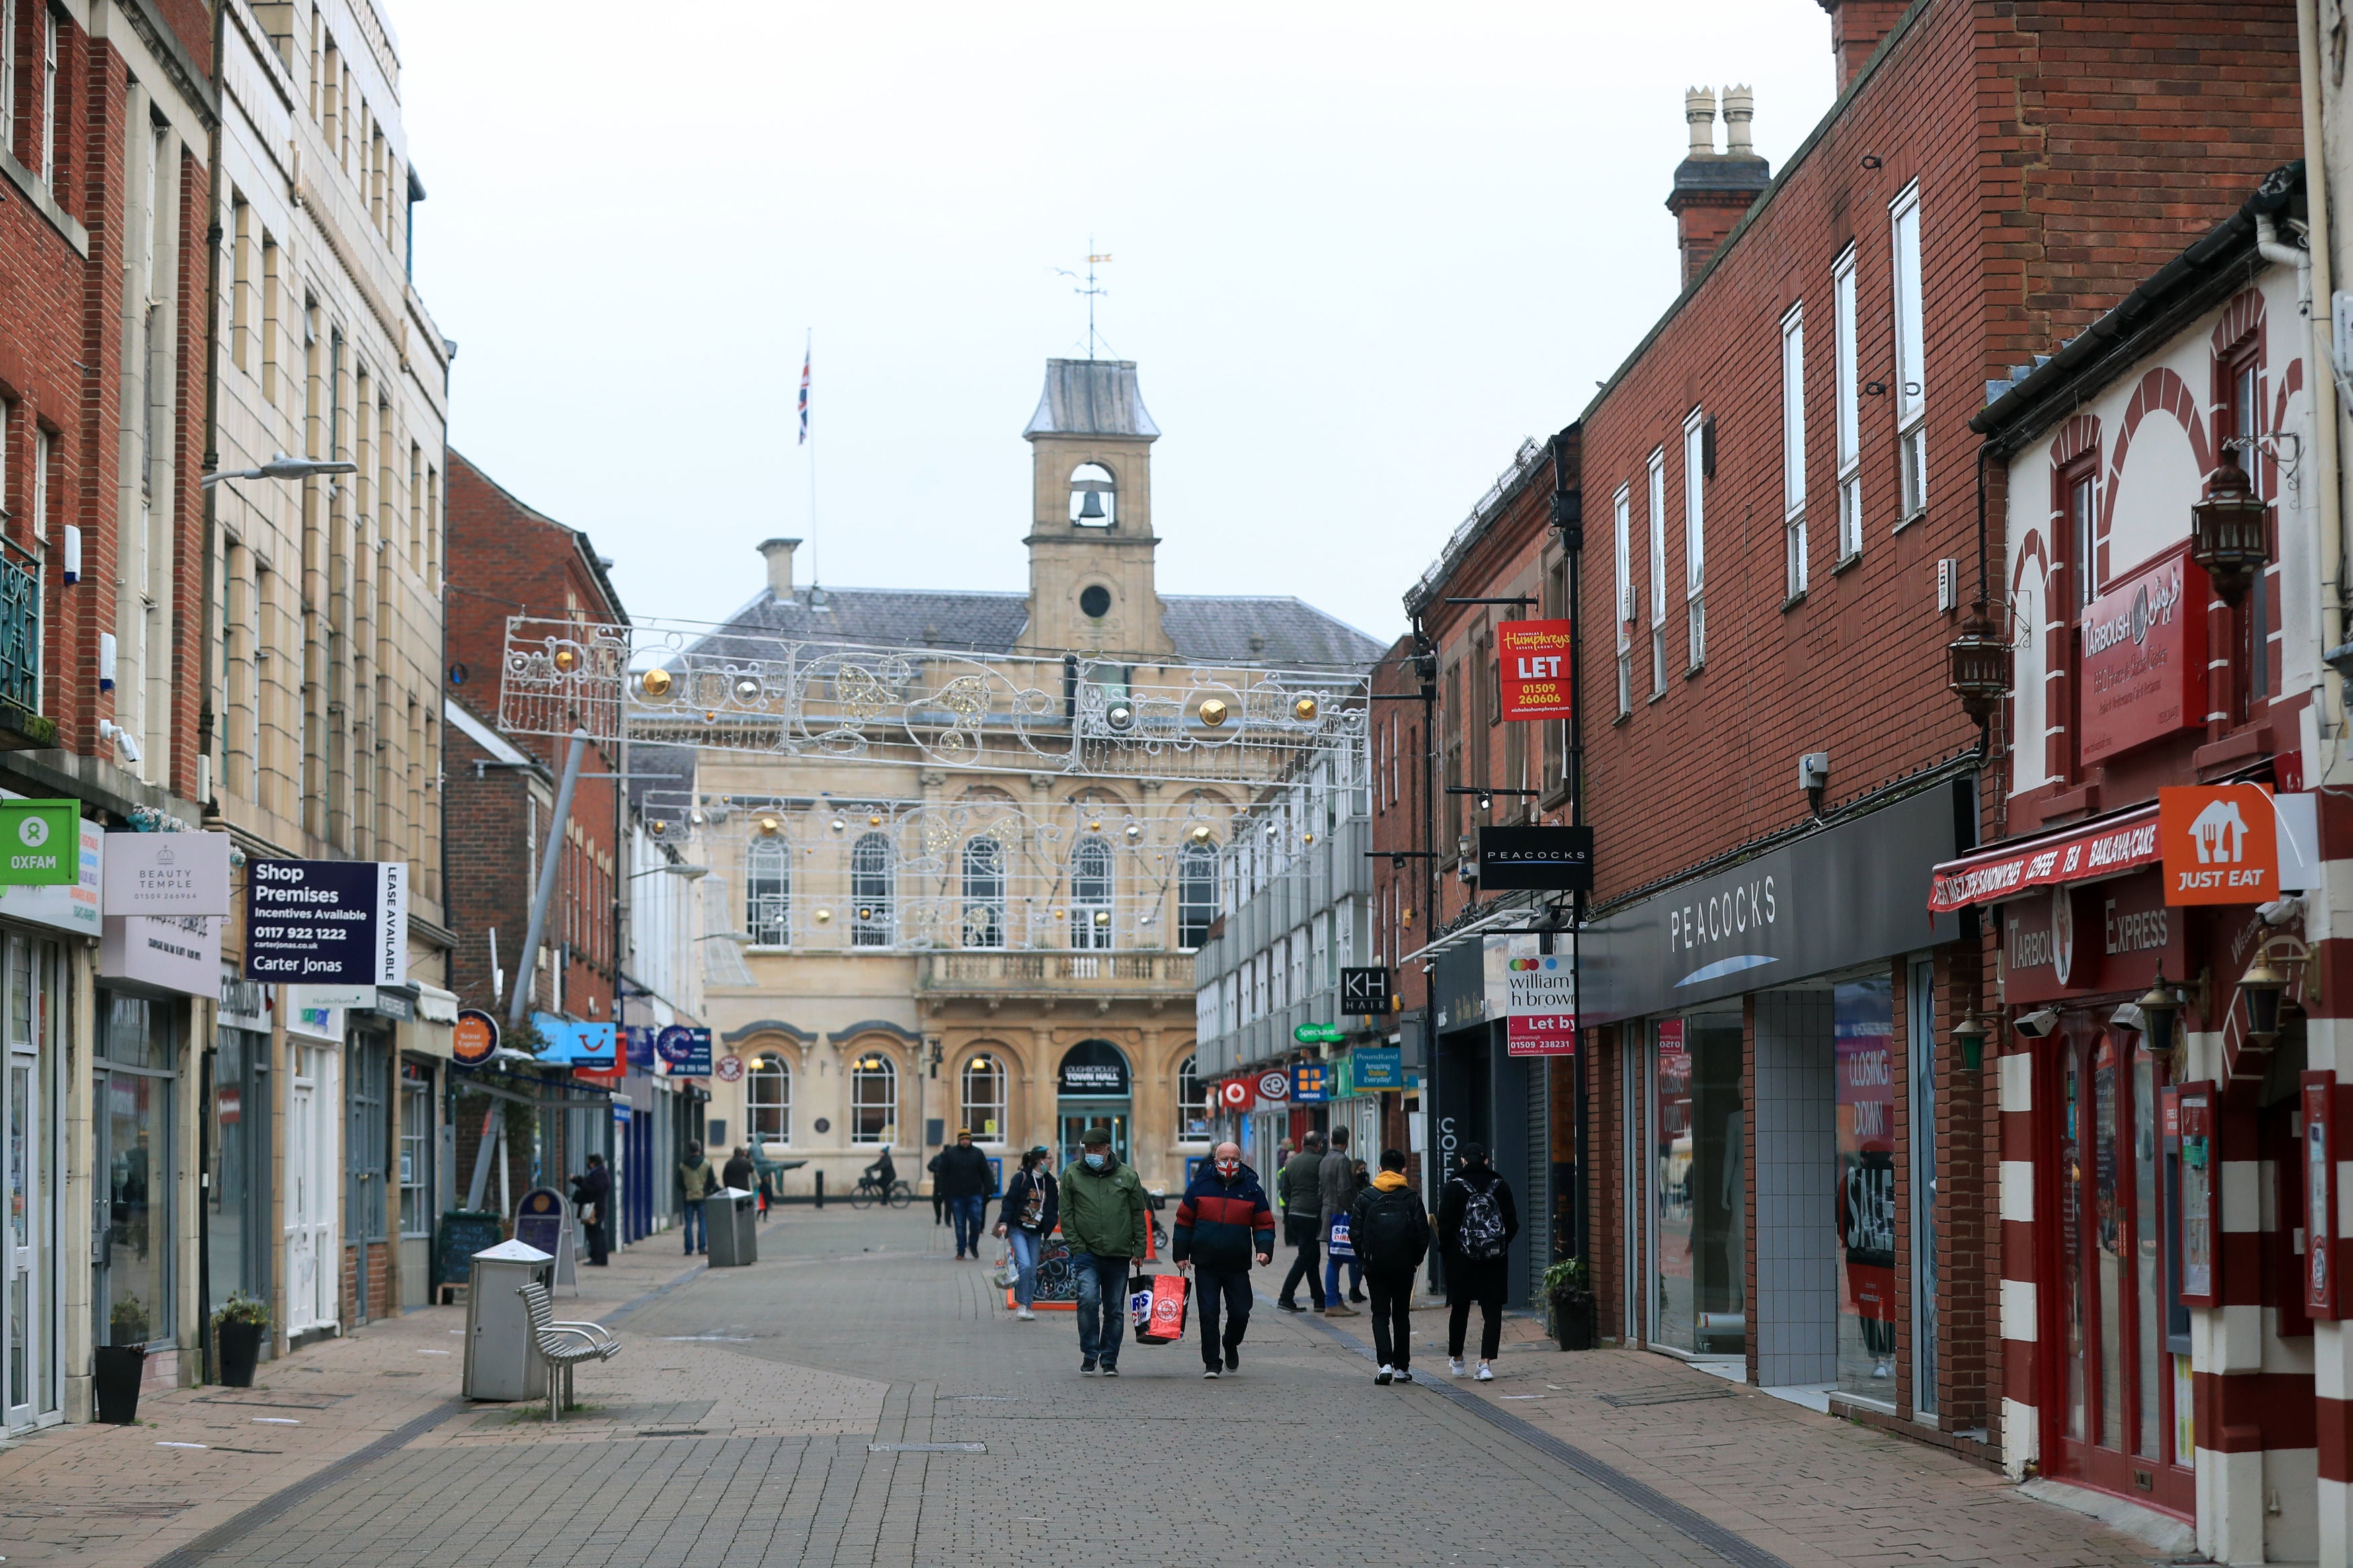 Shoppers on the high street in Loughborough, Leicestershire